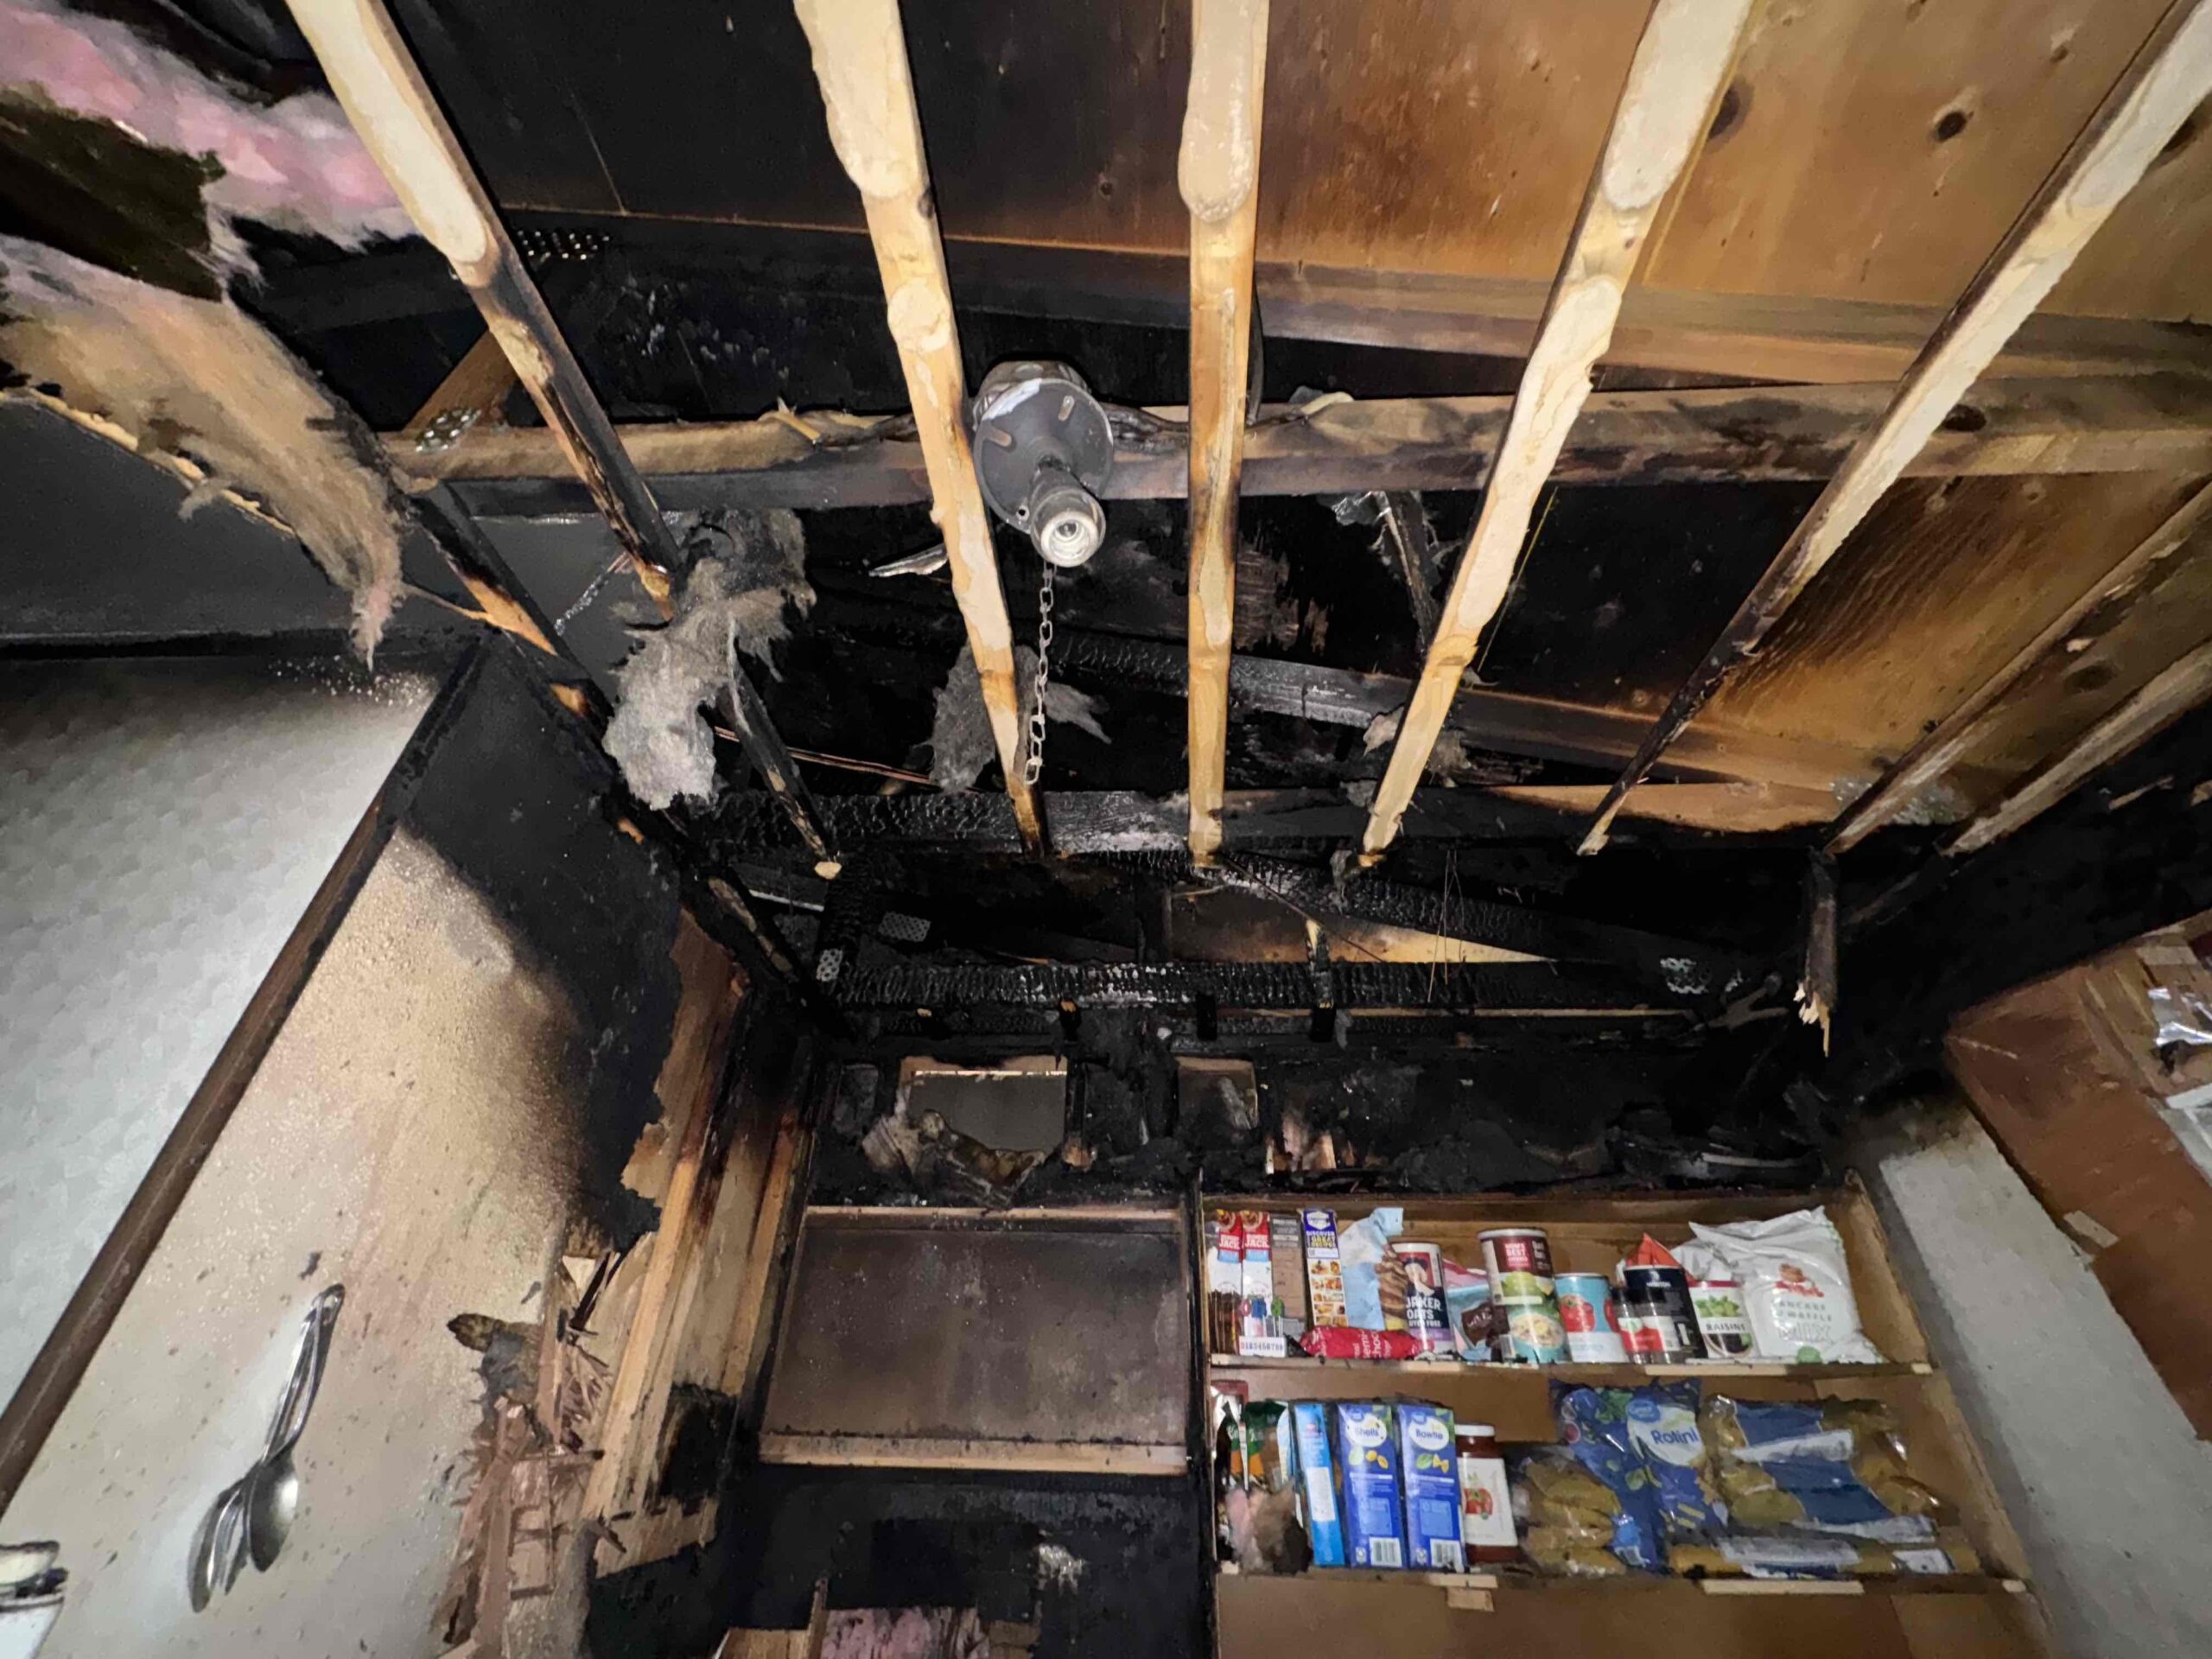 Fire in a kitchen causes smoke and fire damage.